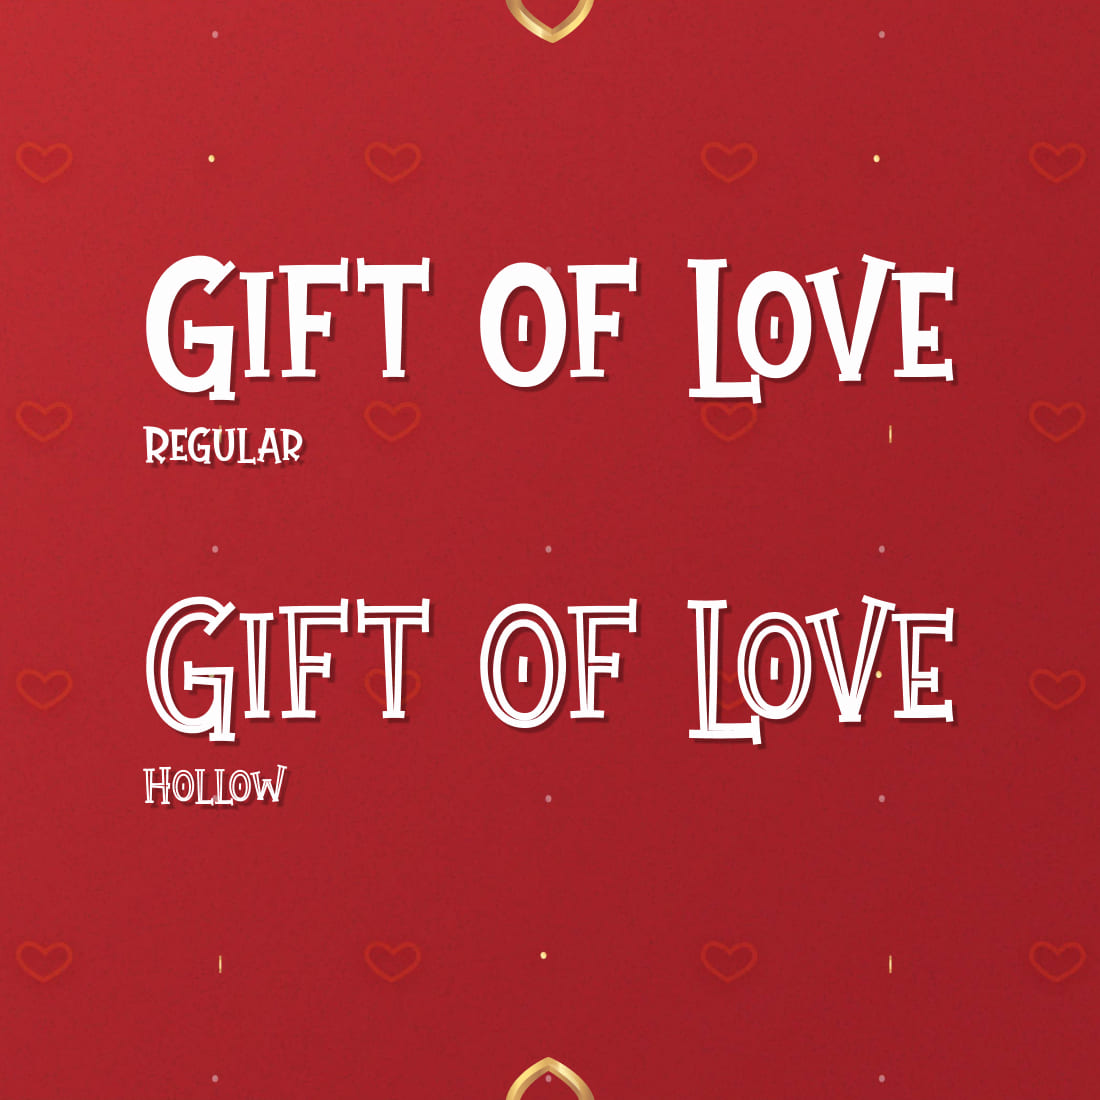 MasterBundles Gift Of Love Free Font Cover Image with Regular and Hollow.